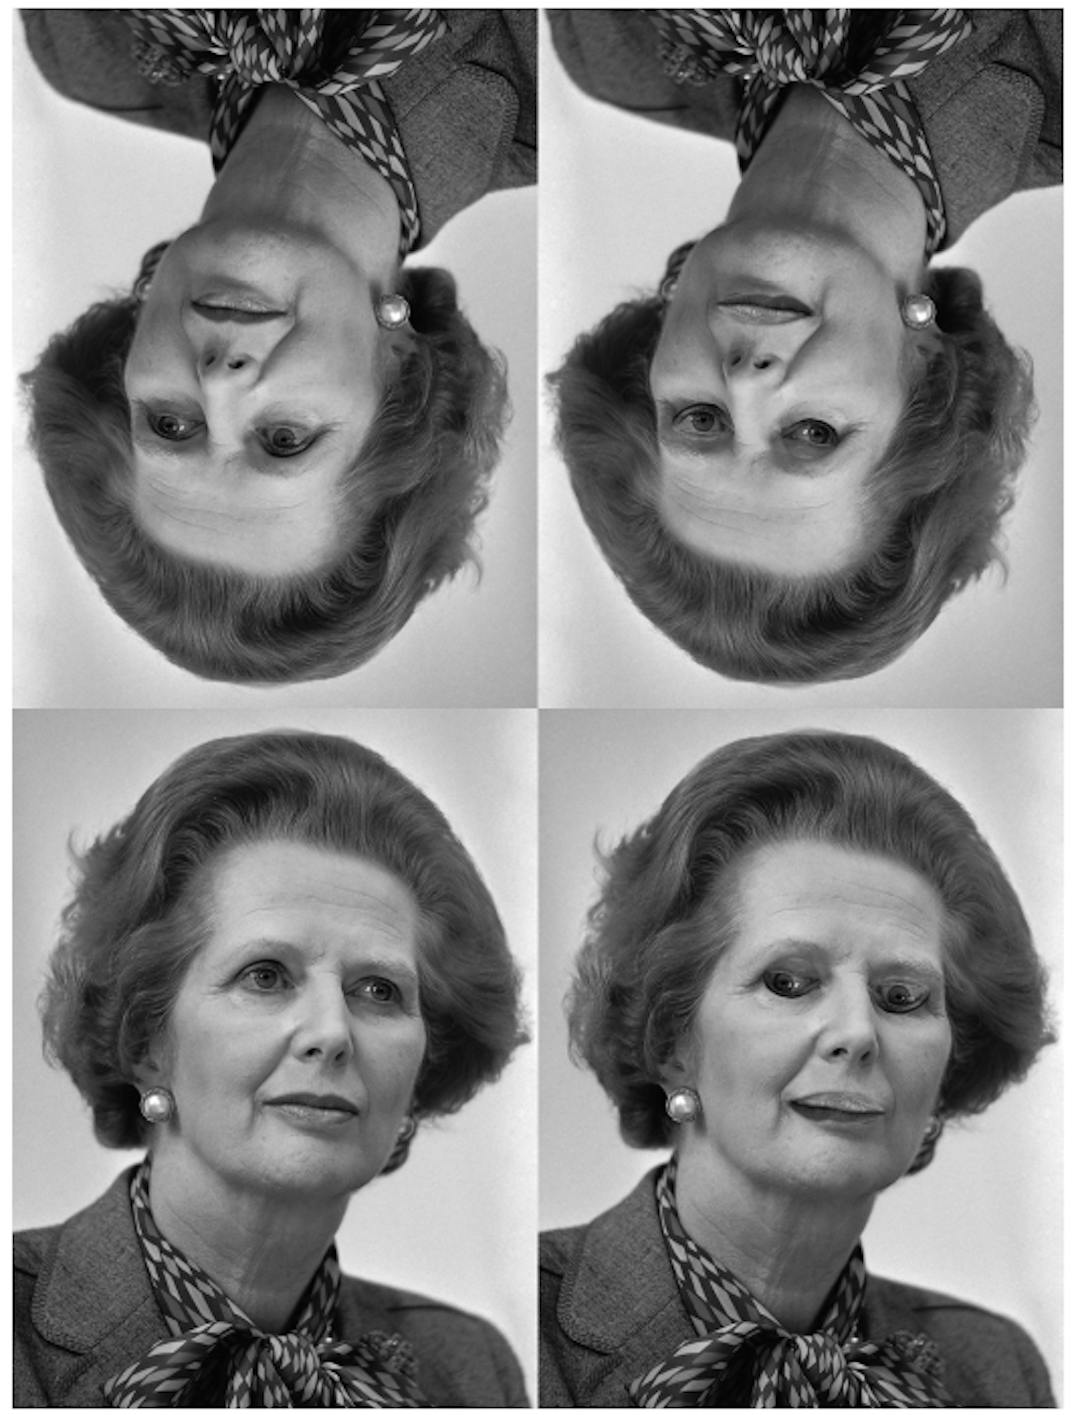 Figure 4. The Margaret Thatcher illusion [31]: the faces in the top row are inverted versions of those on the bottom row. The eye and mouth inversion in the bottom right is evident when the face is upright, but not when it is inverted. (Credit: Rob Bogaerts/Anefo https://commons.wikimedia.org/w/index.php? curid=79649613))